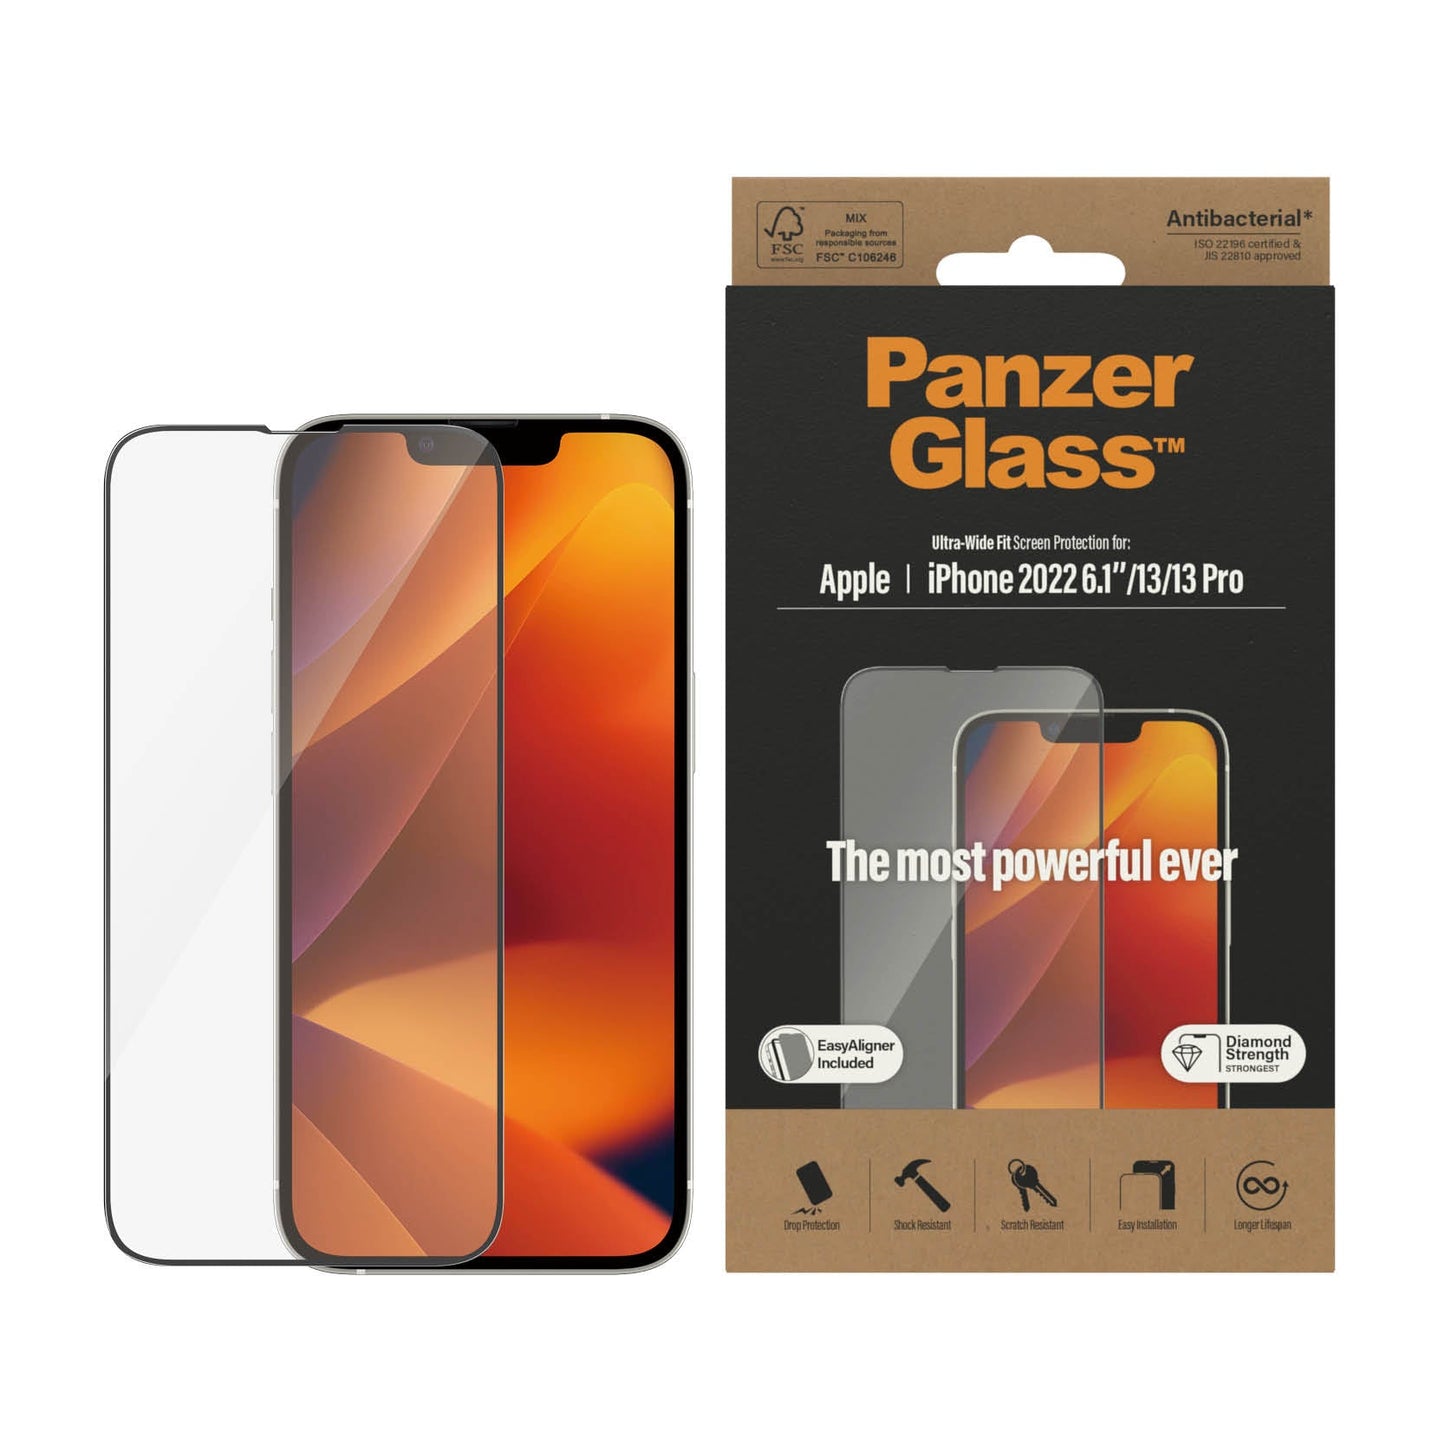 PanzerGlass™ Ultra-Wide Fit Screen Protector for iPhone 14, iPhone 13/13 Pro - Clear